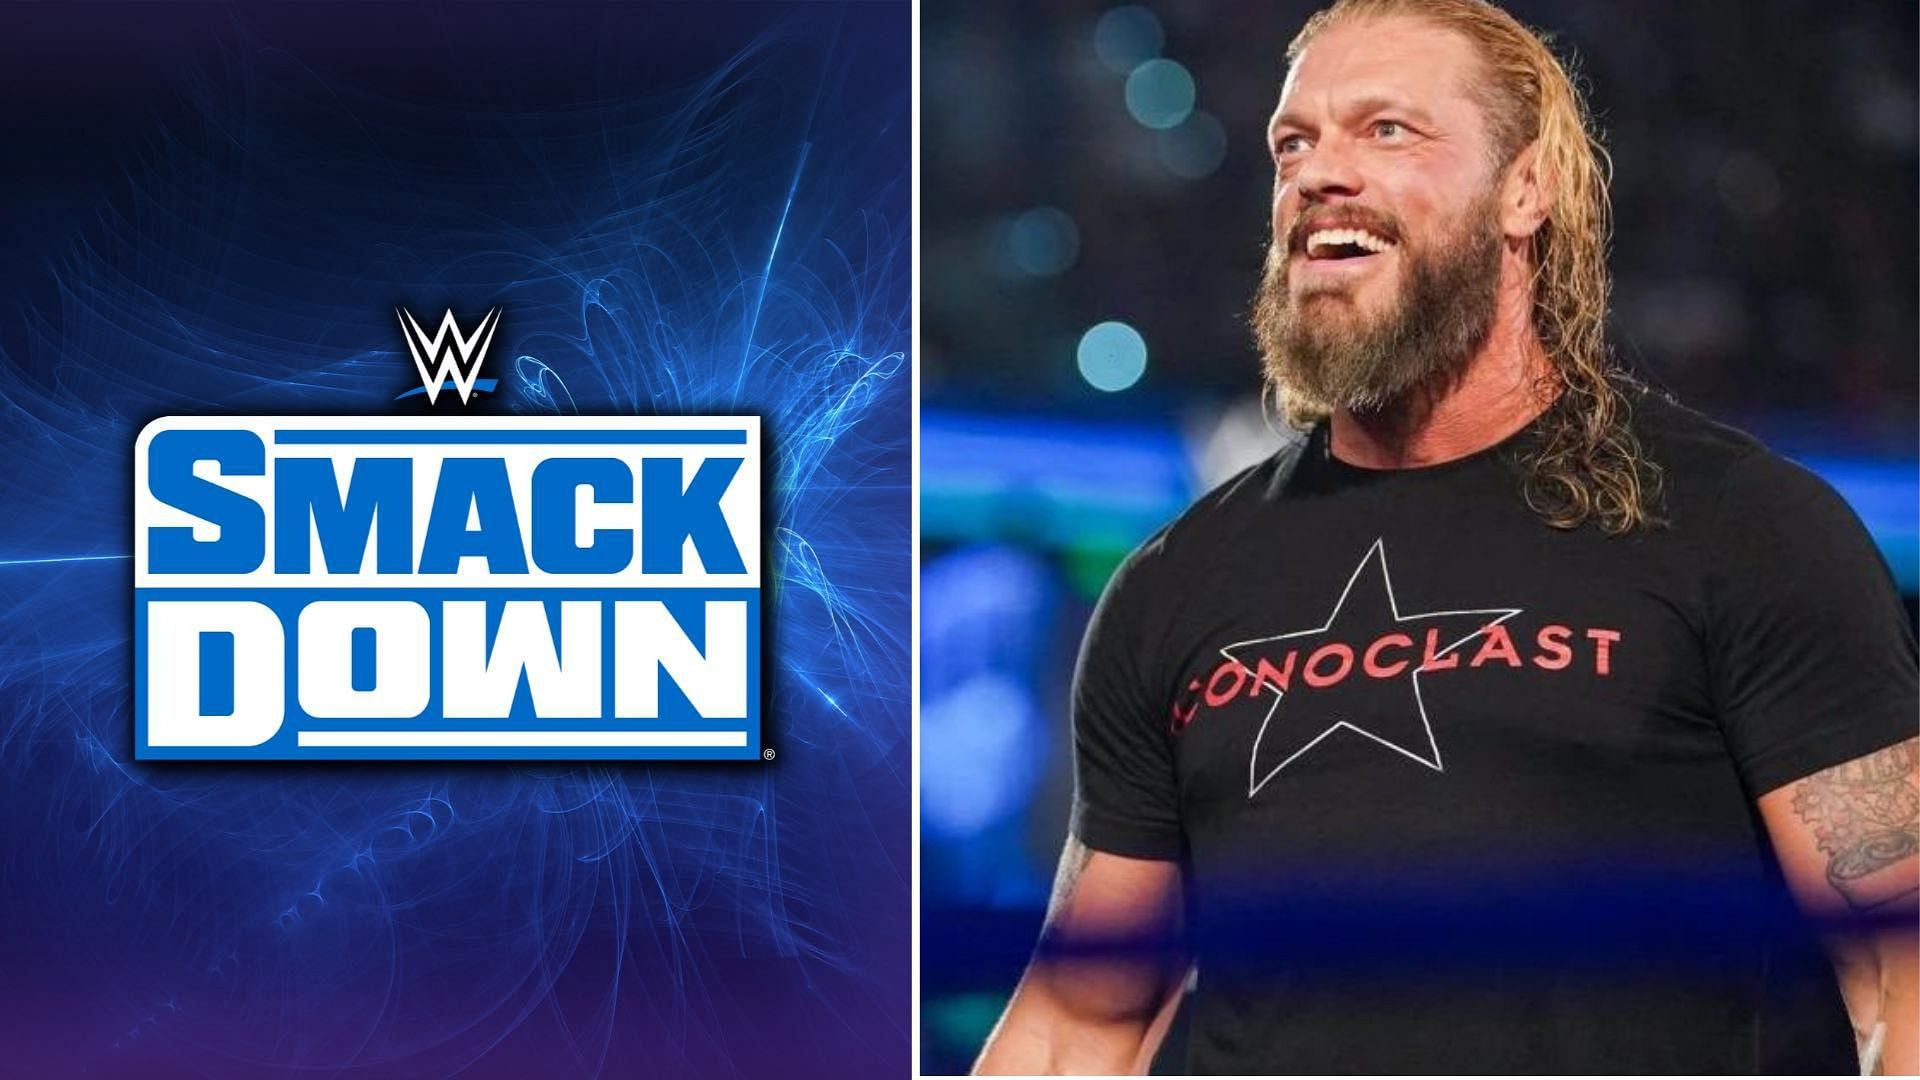 Edge will return to SmackDown after Backlash